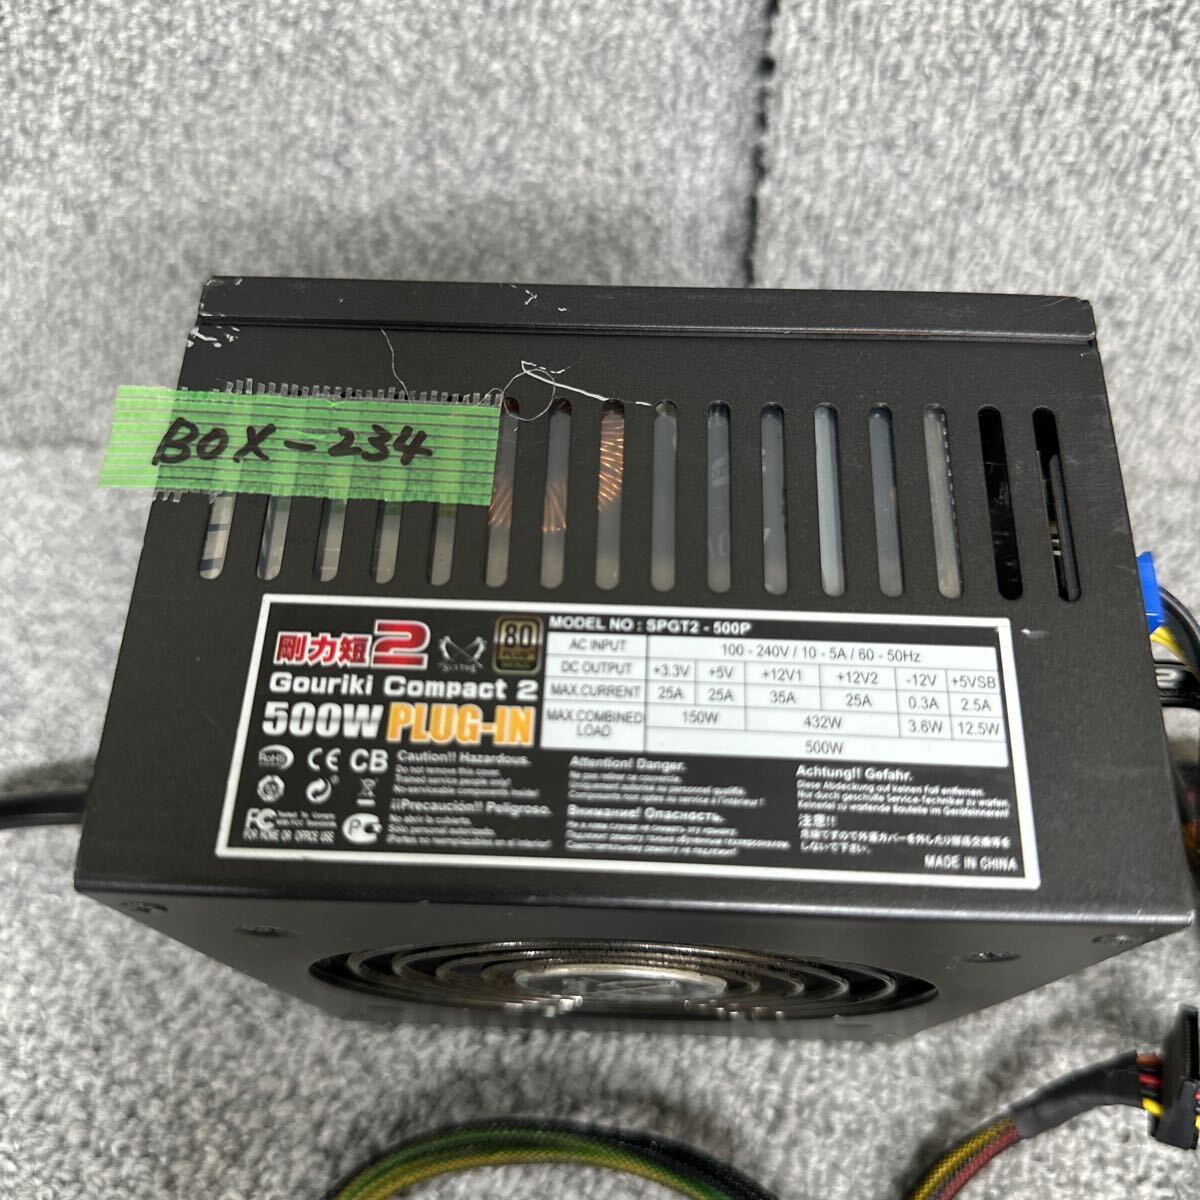 GK super-discount BOX-234 PC power supply BOX SCYTHE Gou power short 2 Gouriki Compact2 PLUG-IN SPGT2-500P 500W 80PLUS BRONZE power supply unit voltage has confirmed secondhand goods 